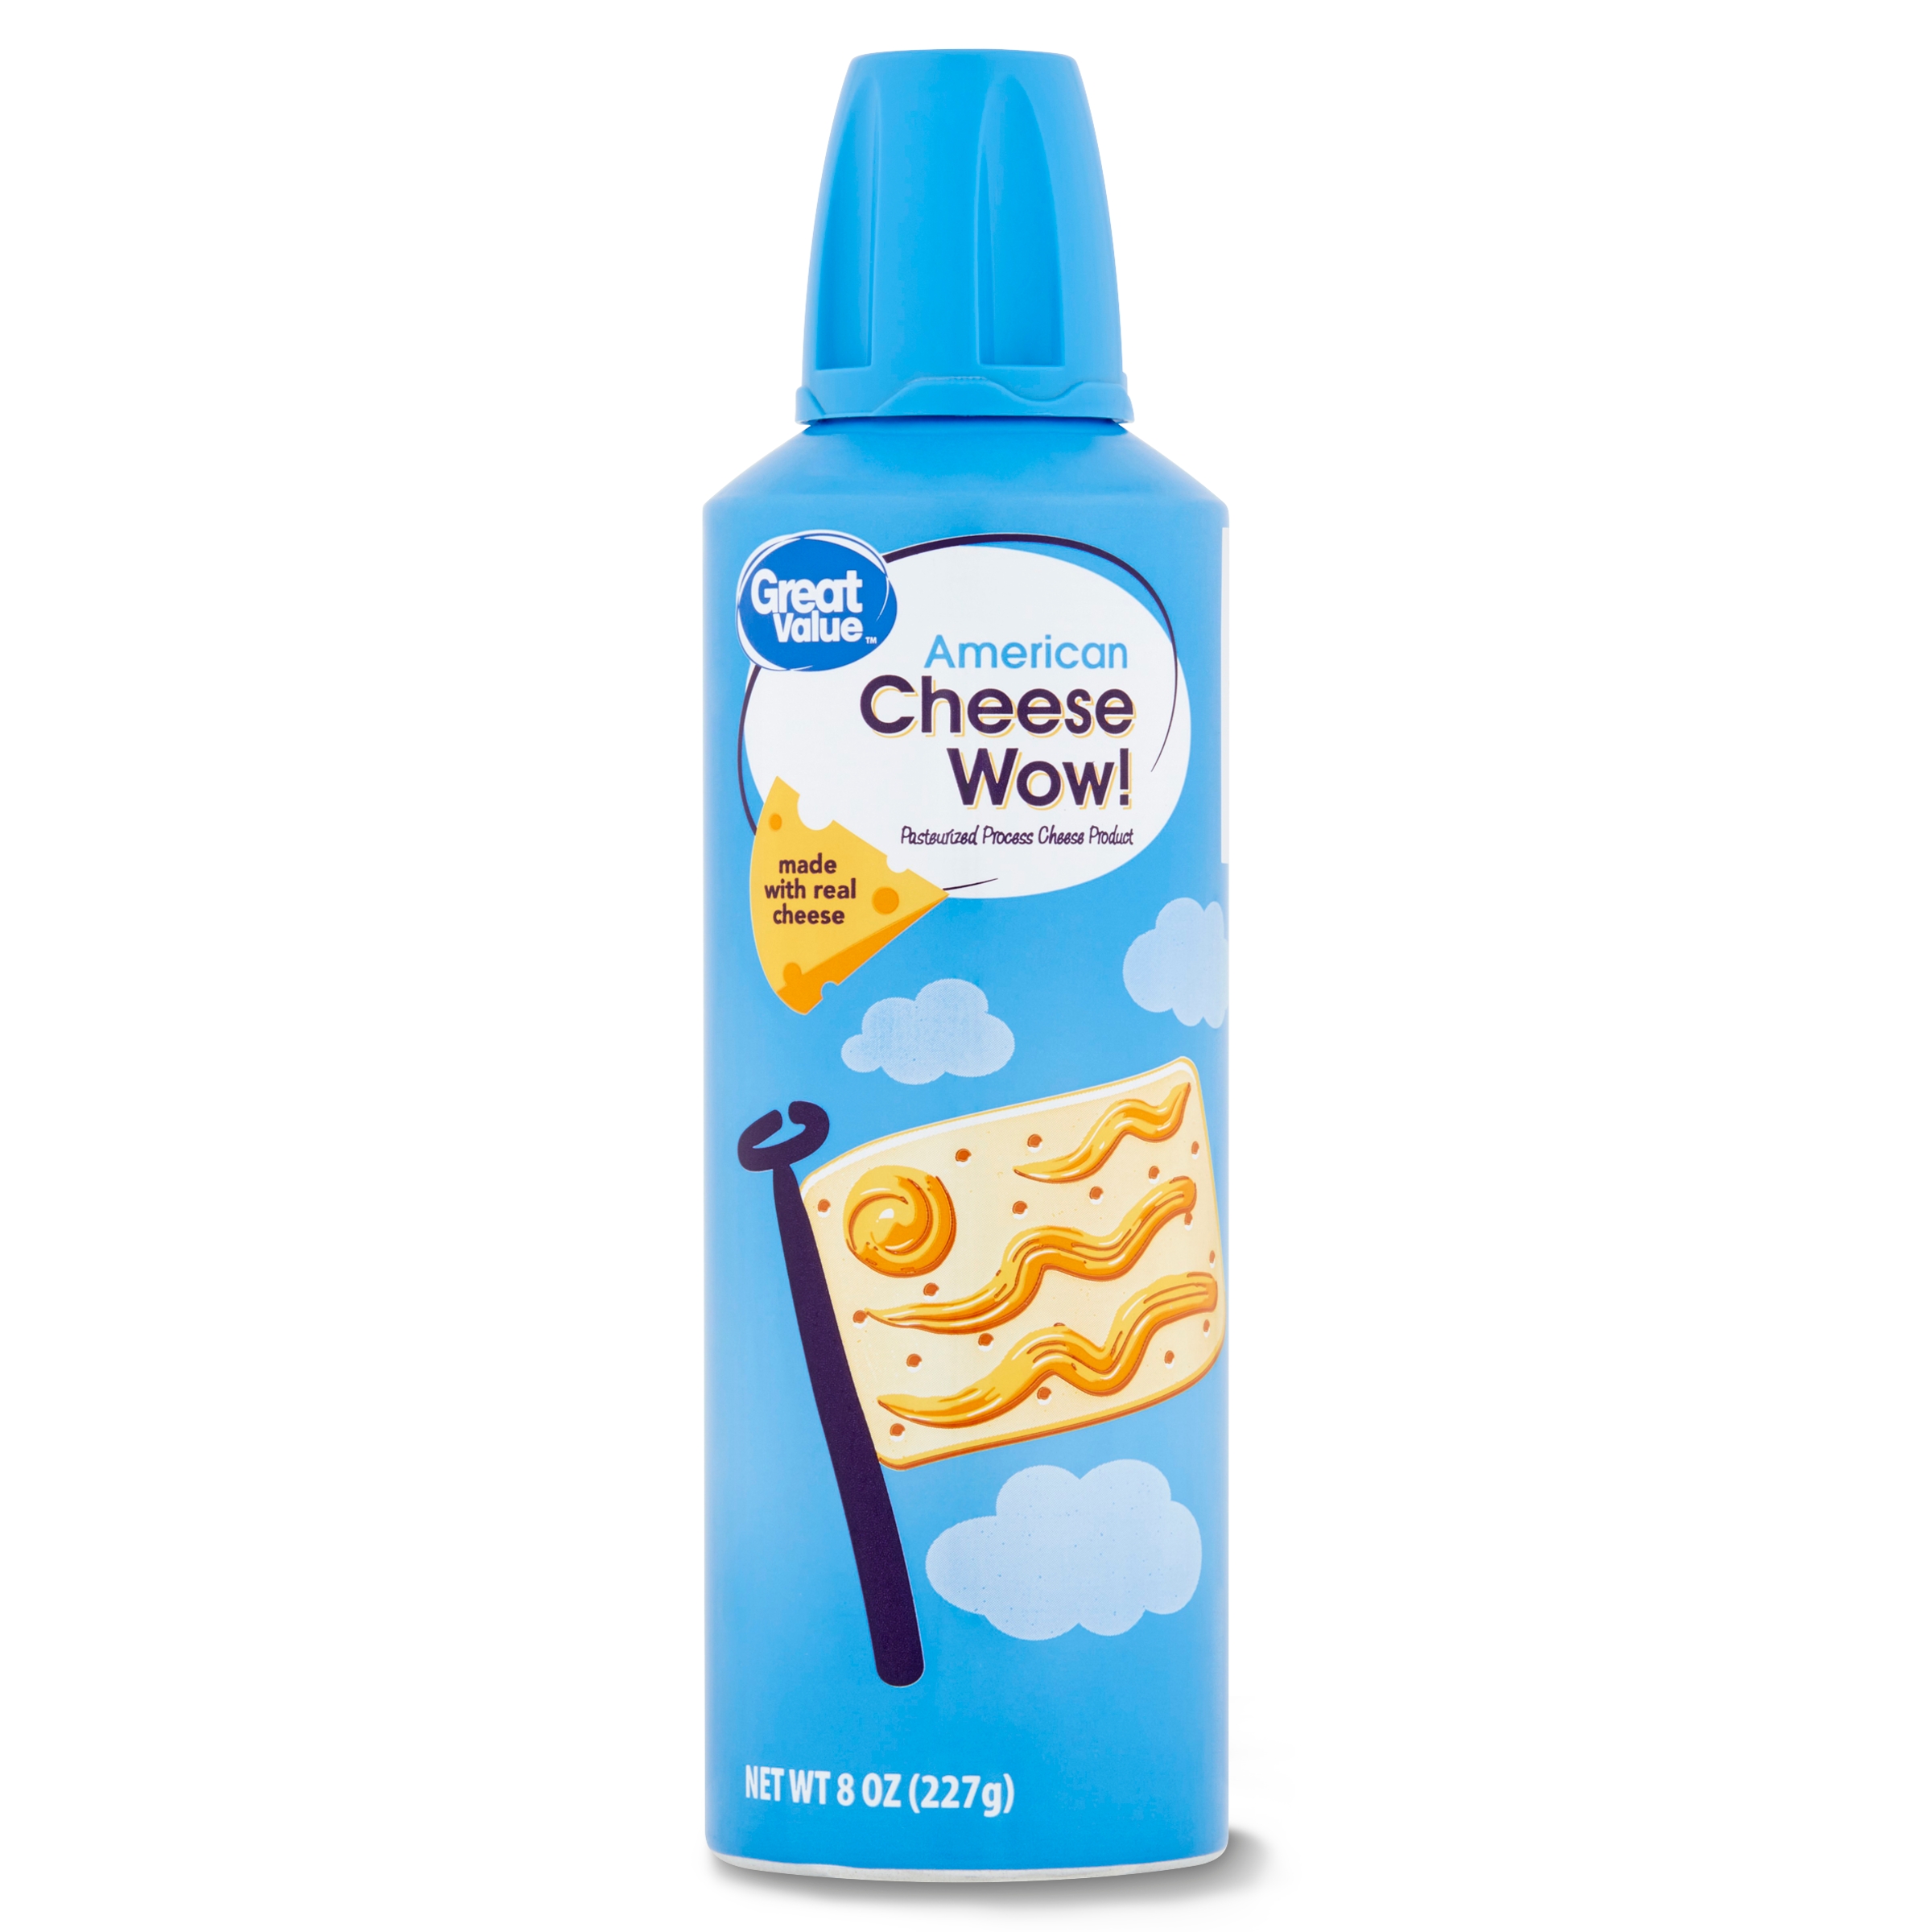 Great Value Cheese Wow! Spray Cheese, American Cheese, 8 oz - image 1 of 8